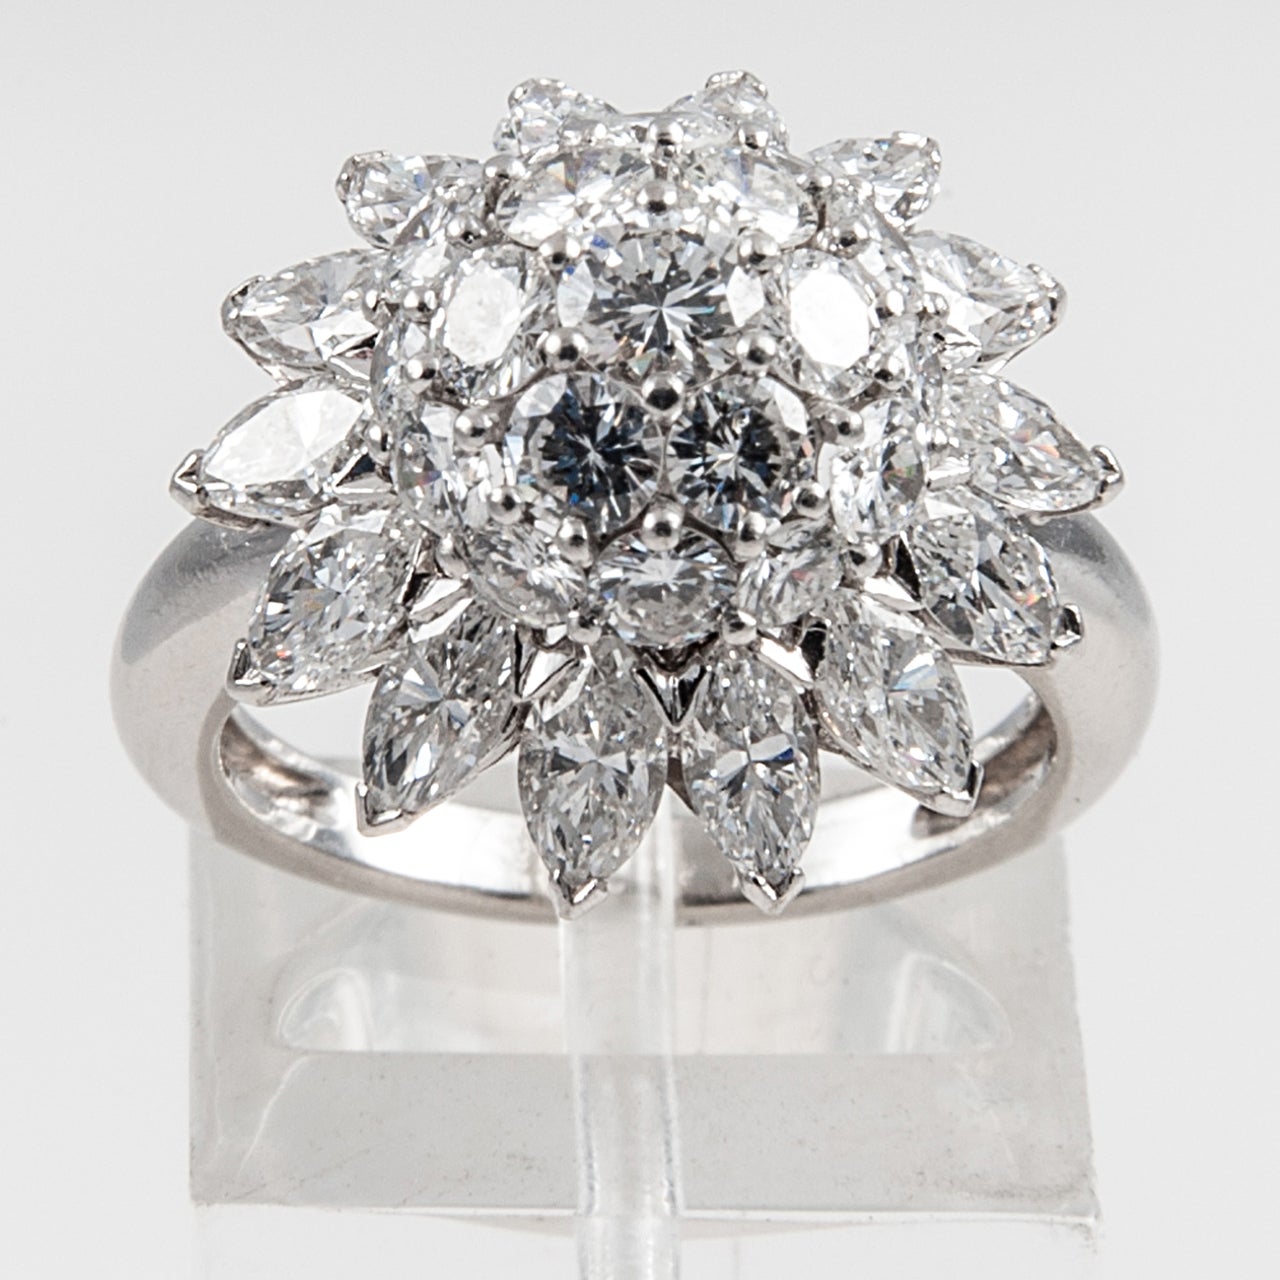 Domed cluster ring set with Diamonds in Platinum. Inscribed S.